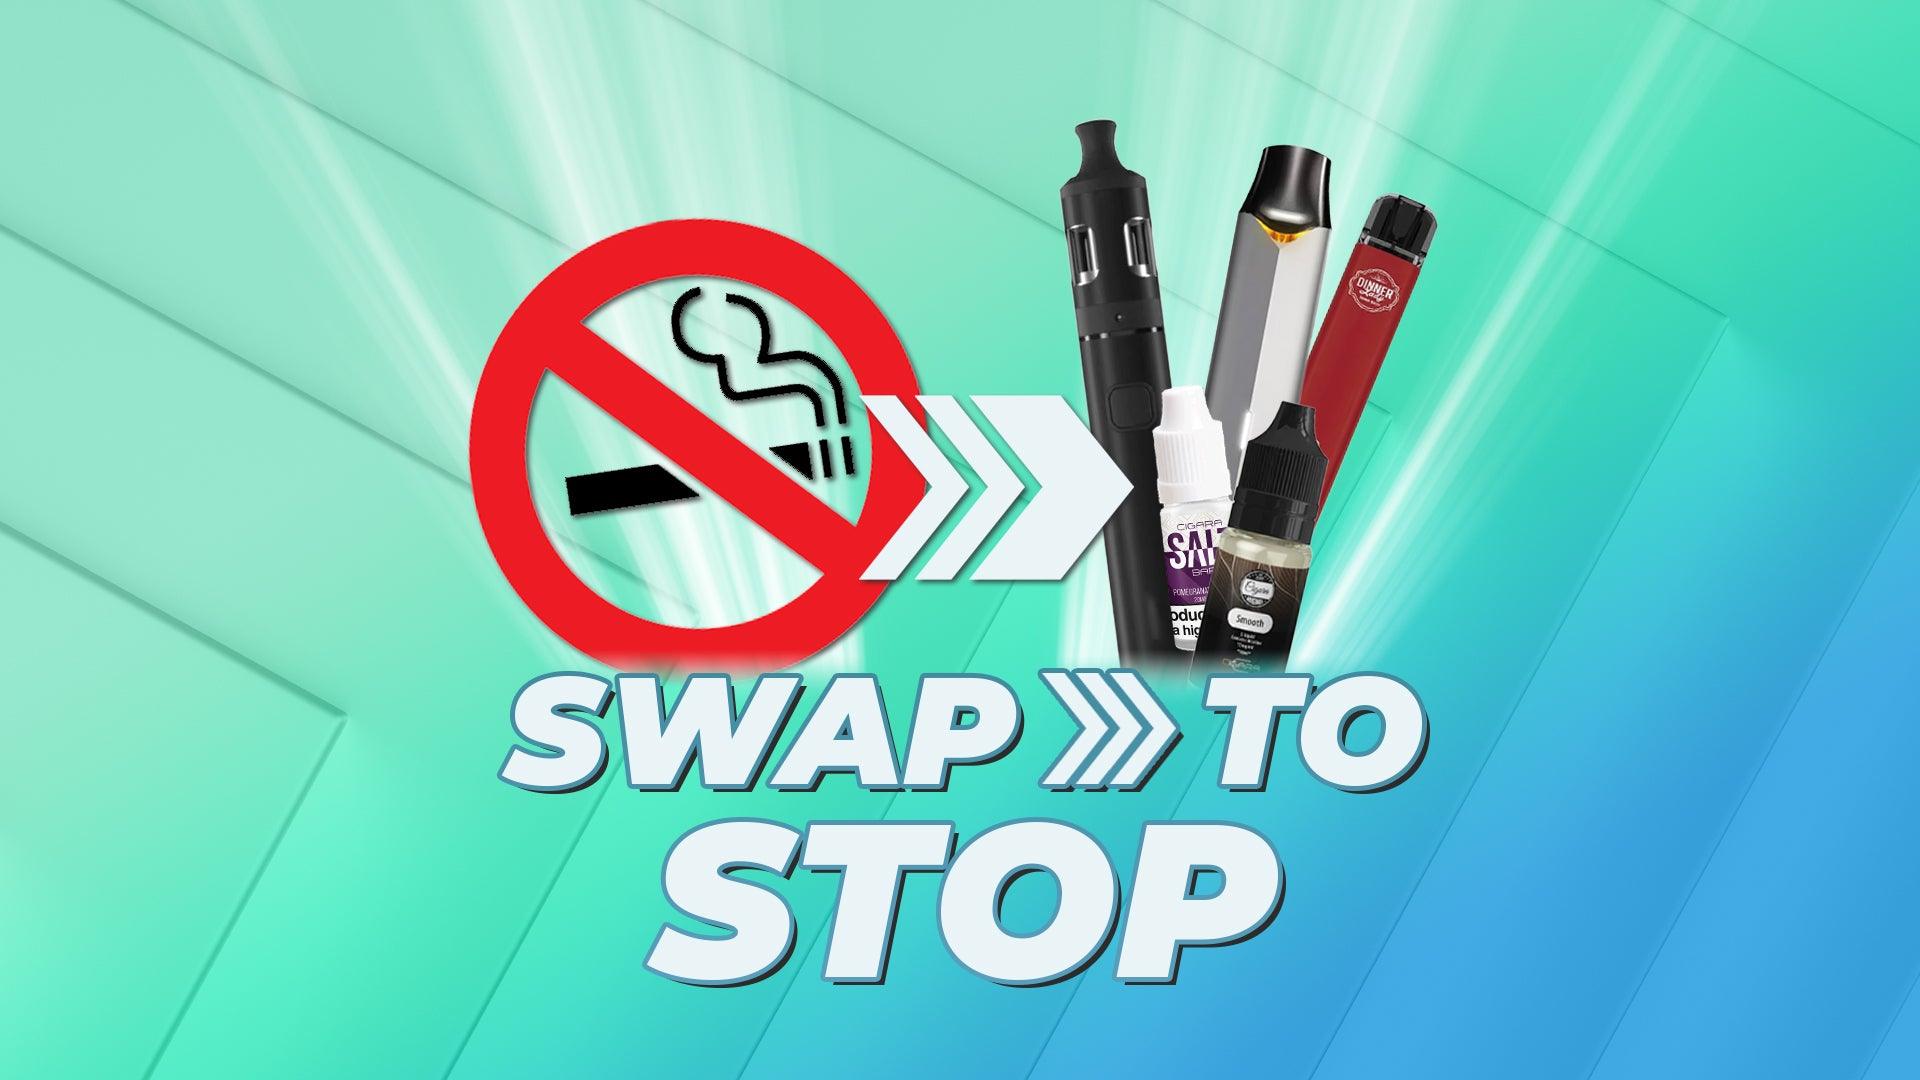 Swap To Stop Campaign